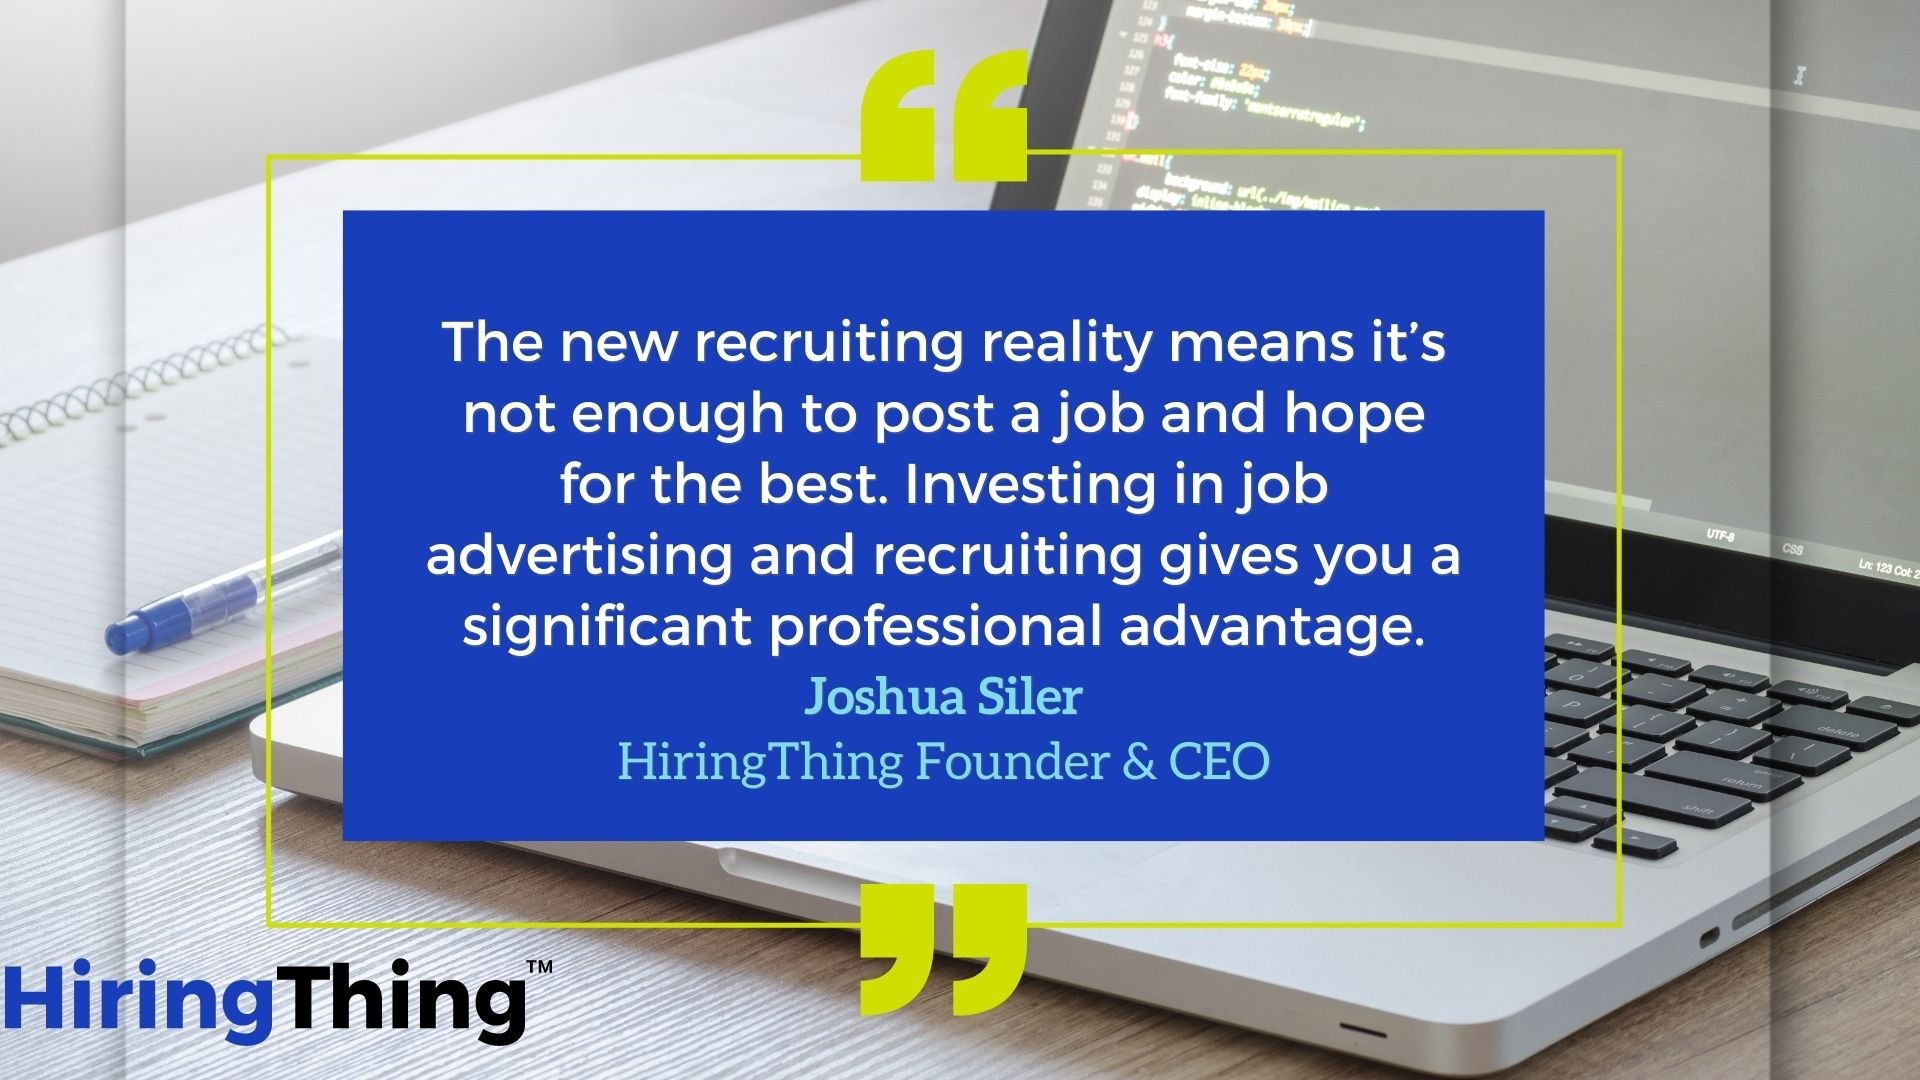 Quote about job advertising and recruiting.